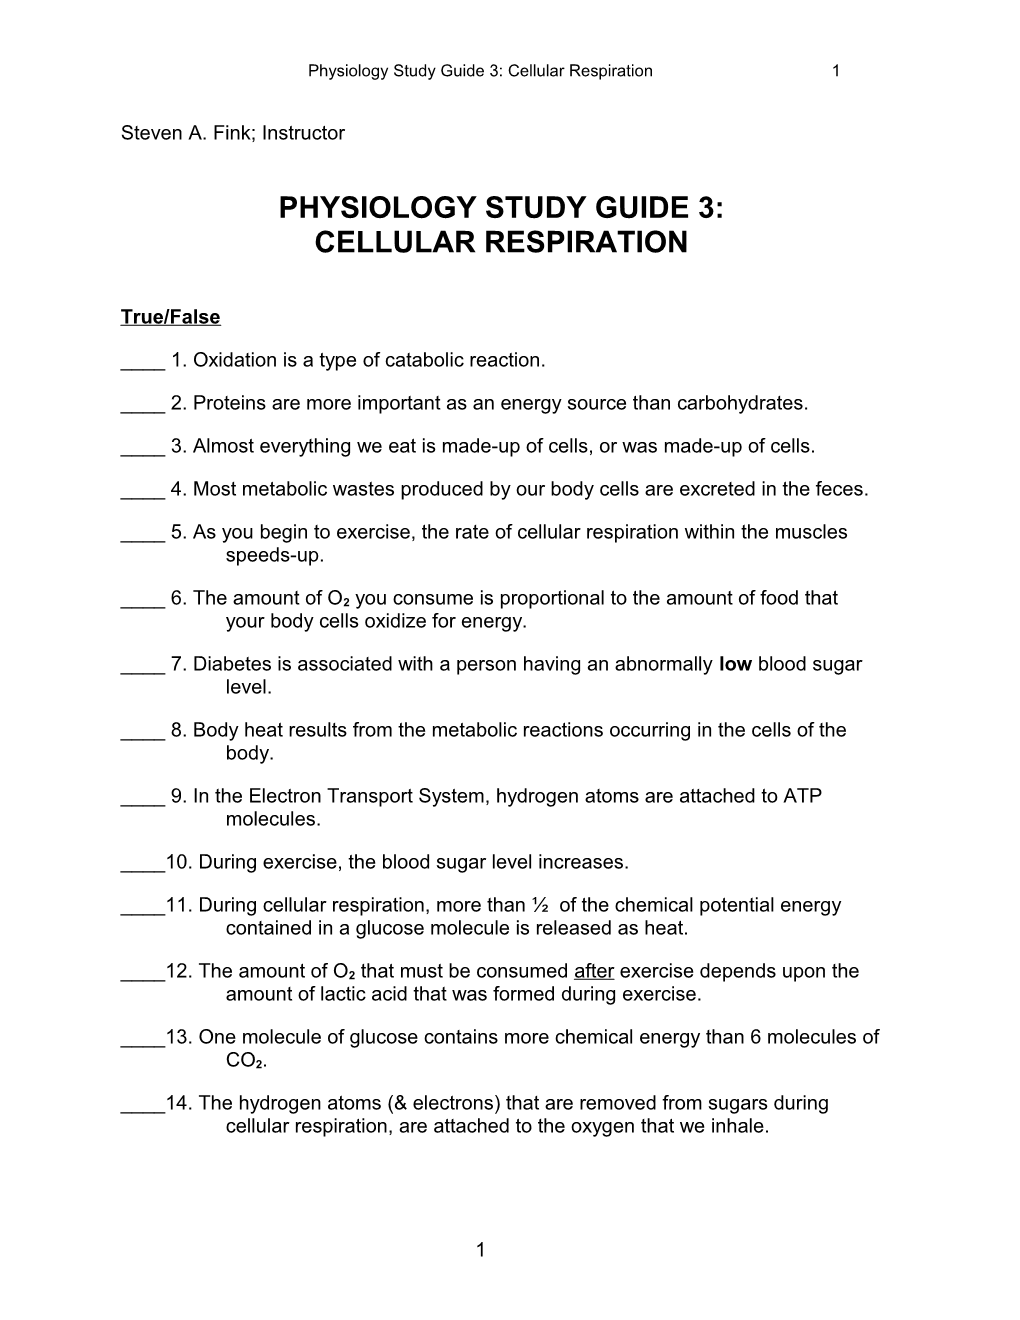 Physiology Study Guide 3: Cellular Respiration1